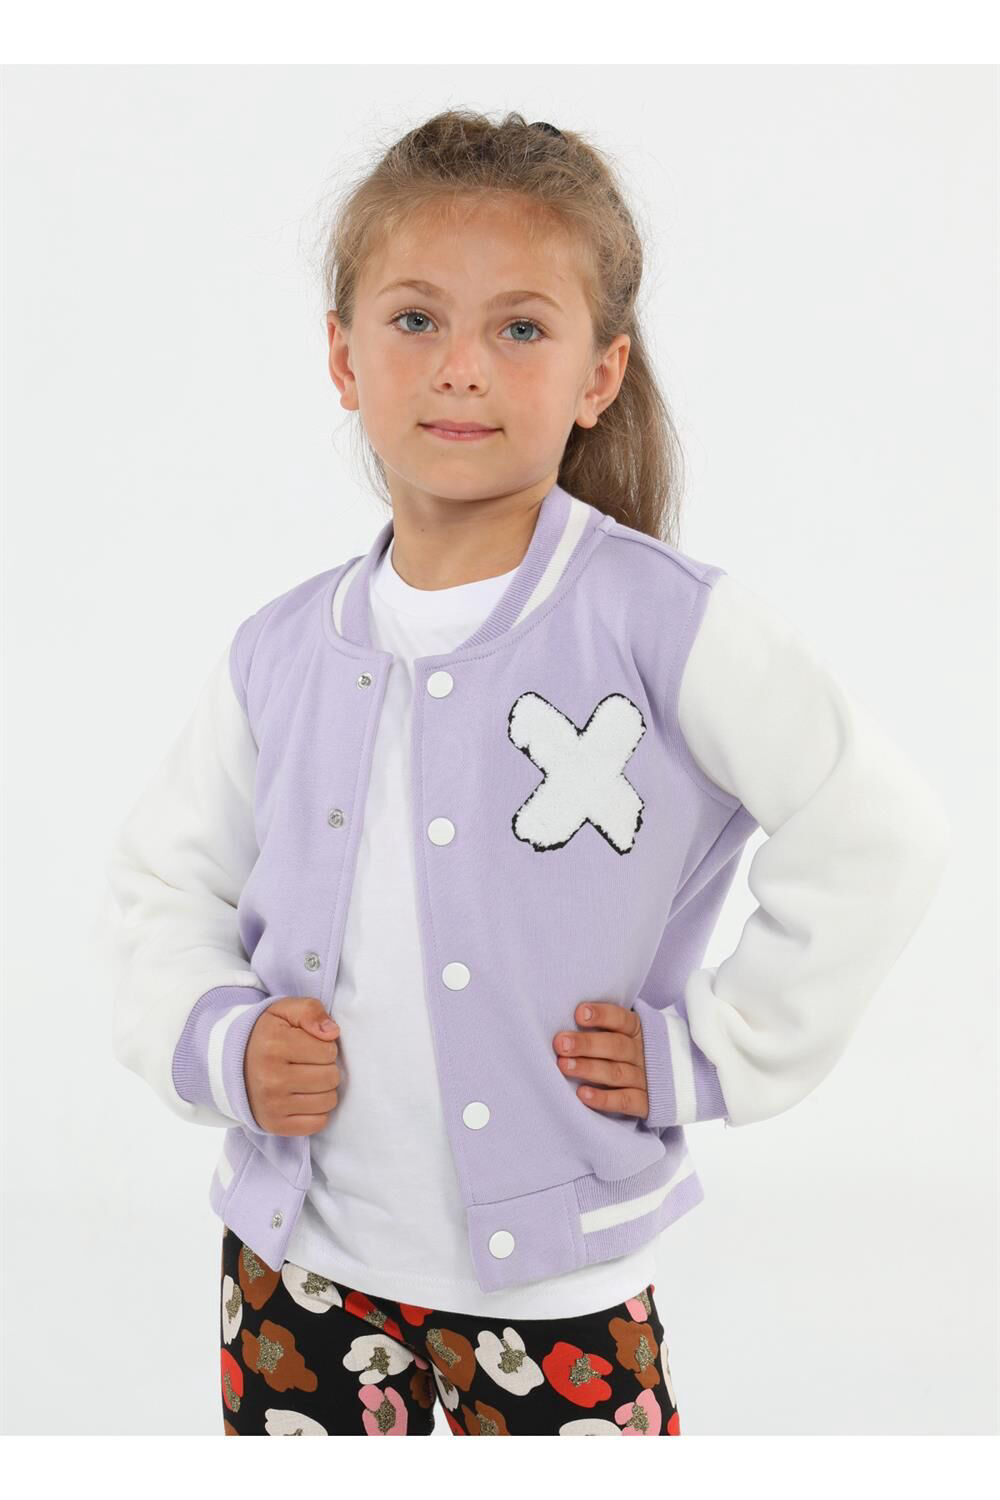 Children's jacket suitable for unisex - with a front zipper - winter